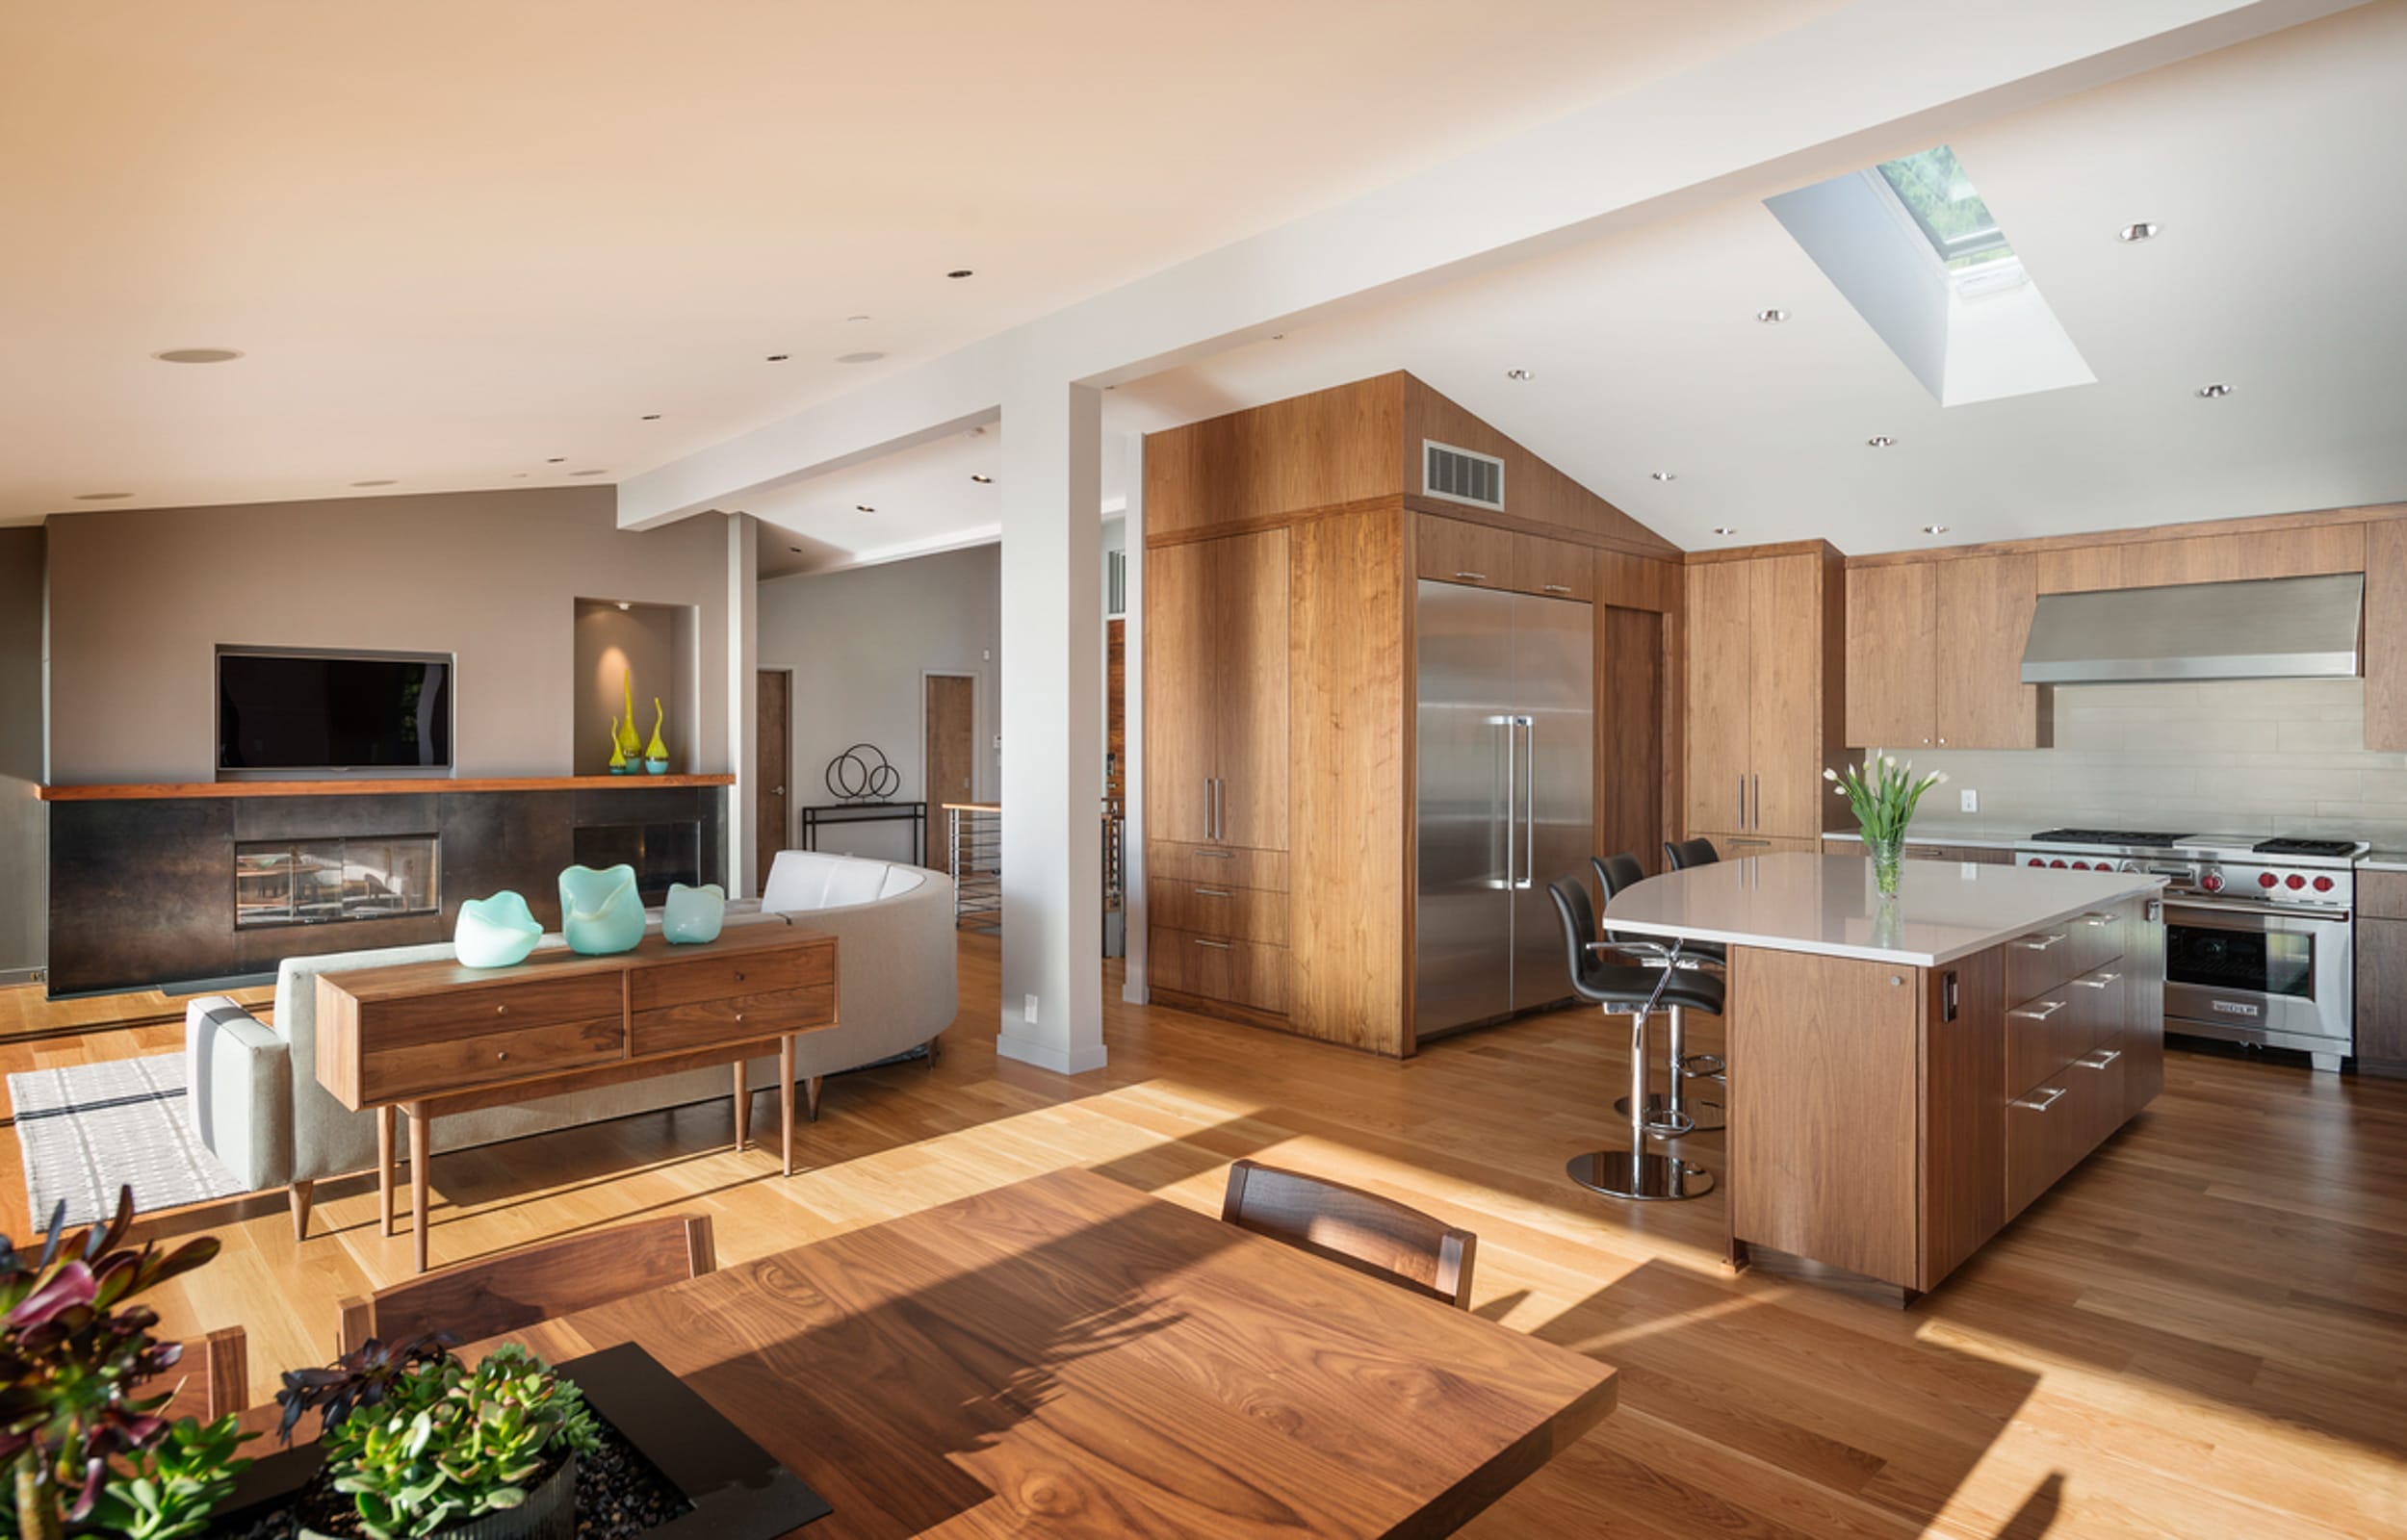 A modern kitchen with wood cabinets and a skylight.